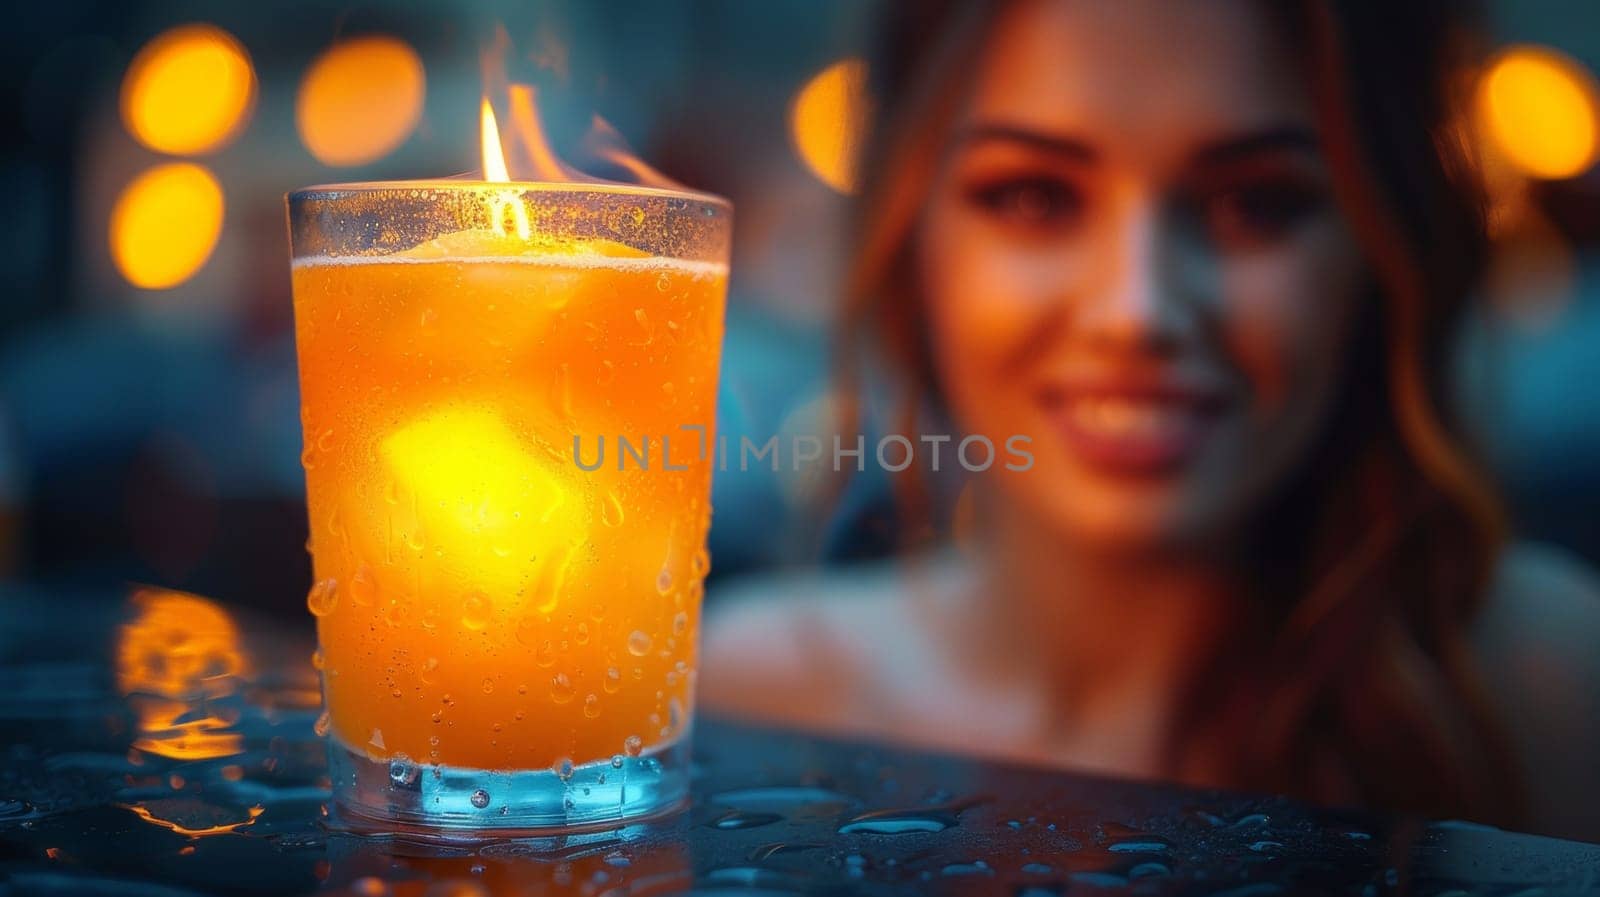 A woman sitting in front of a drink with an orange flame